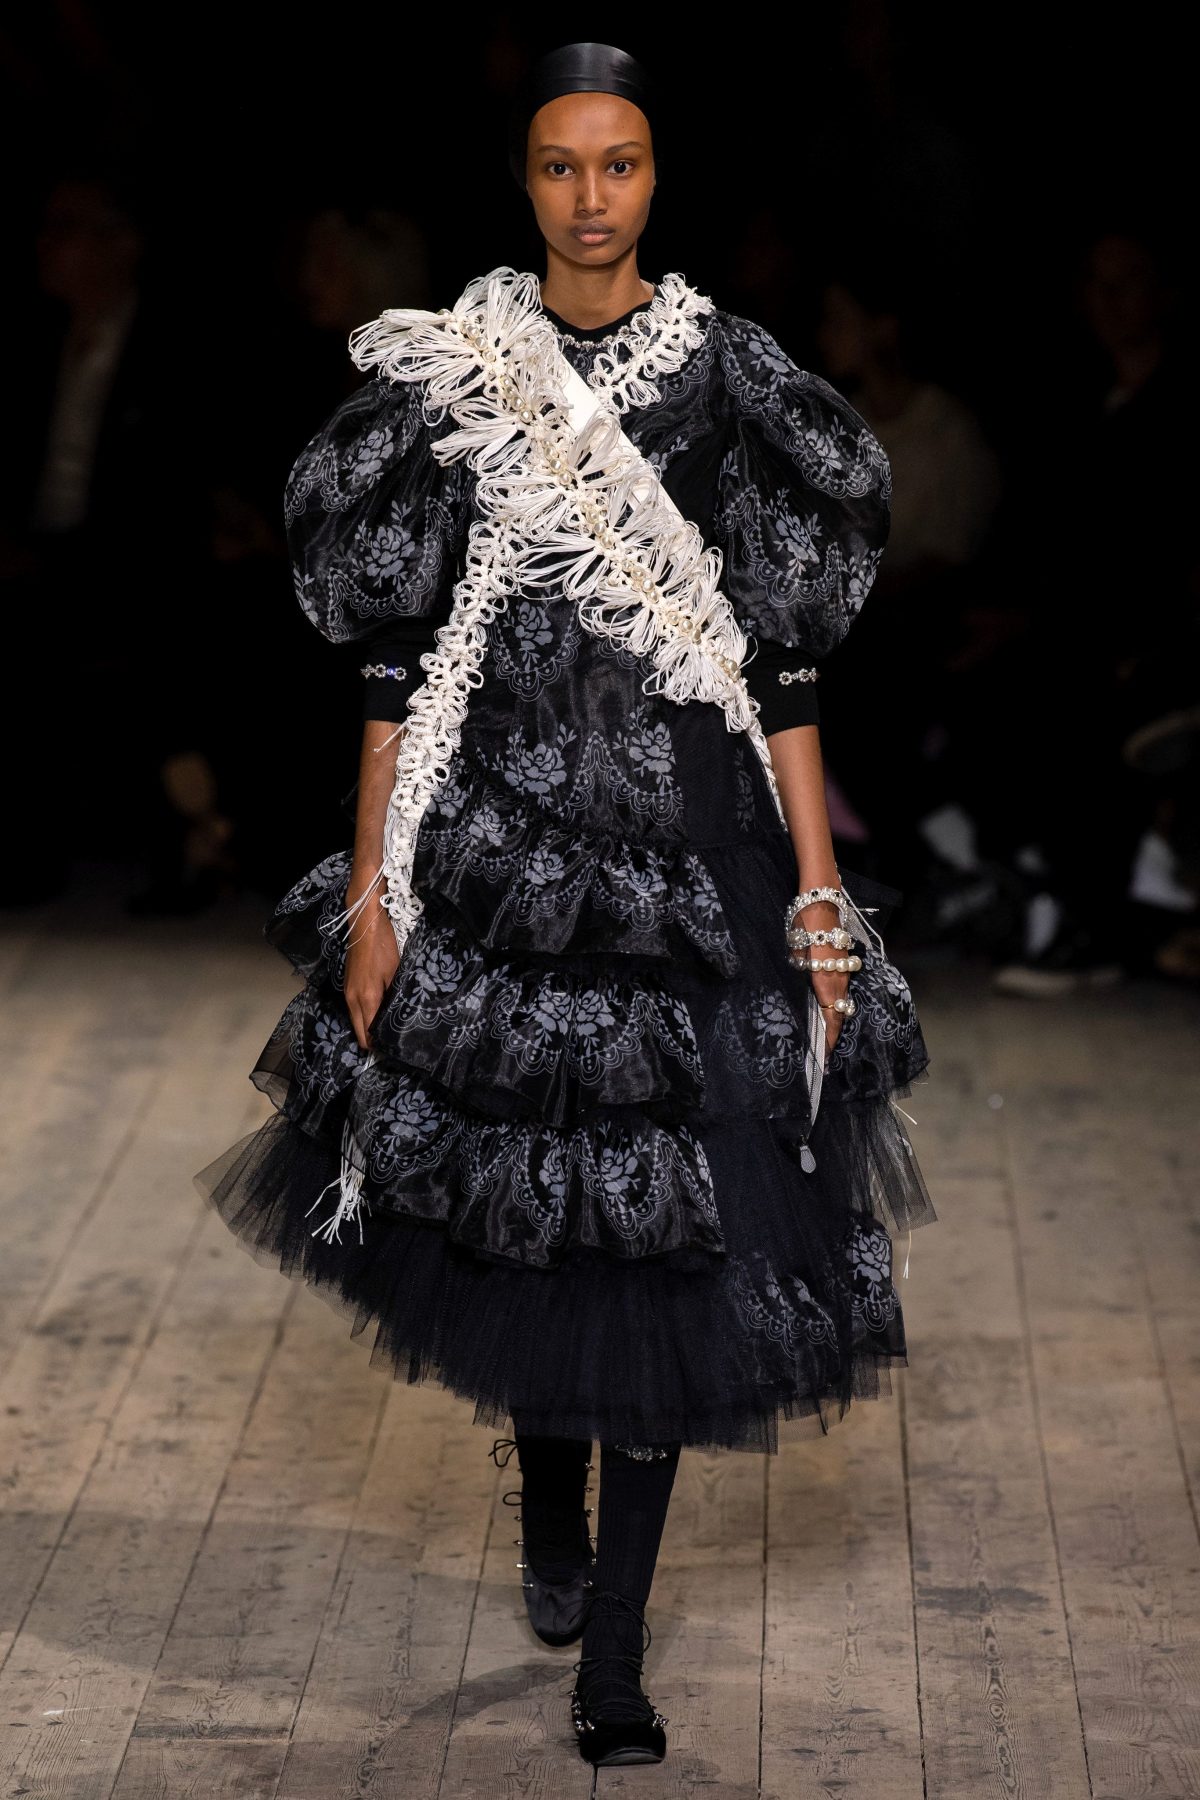 Simone Rocha Spring/Summer 2020 Ready-to-Wear Show Review